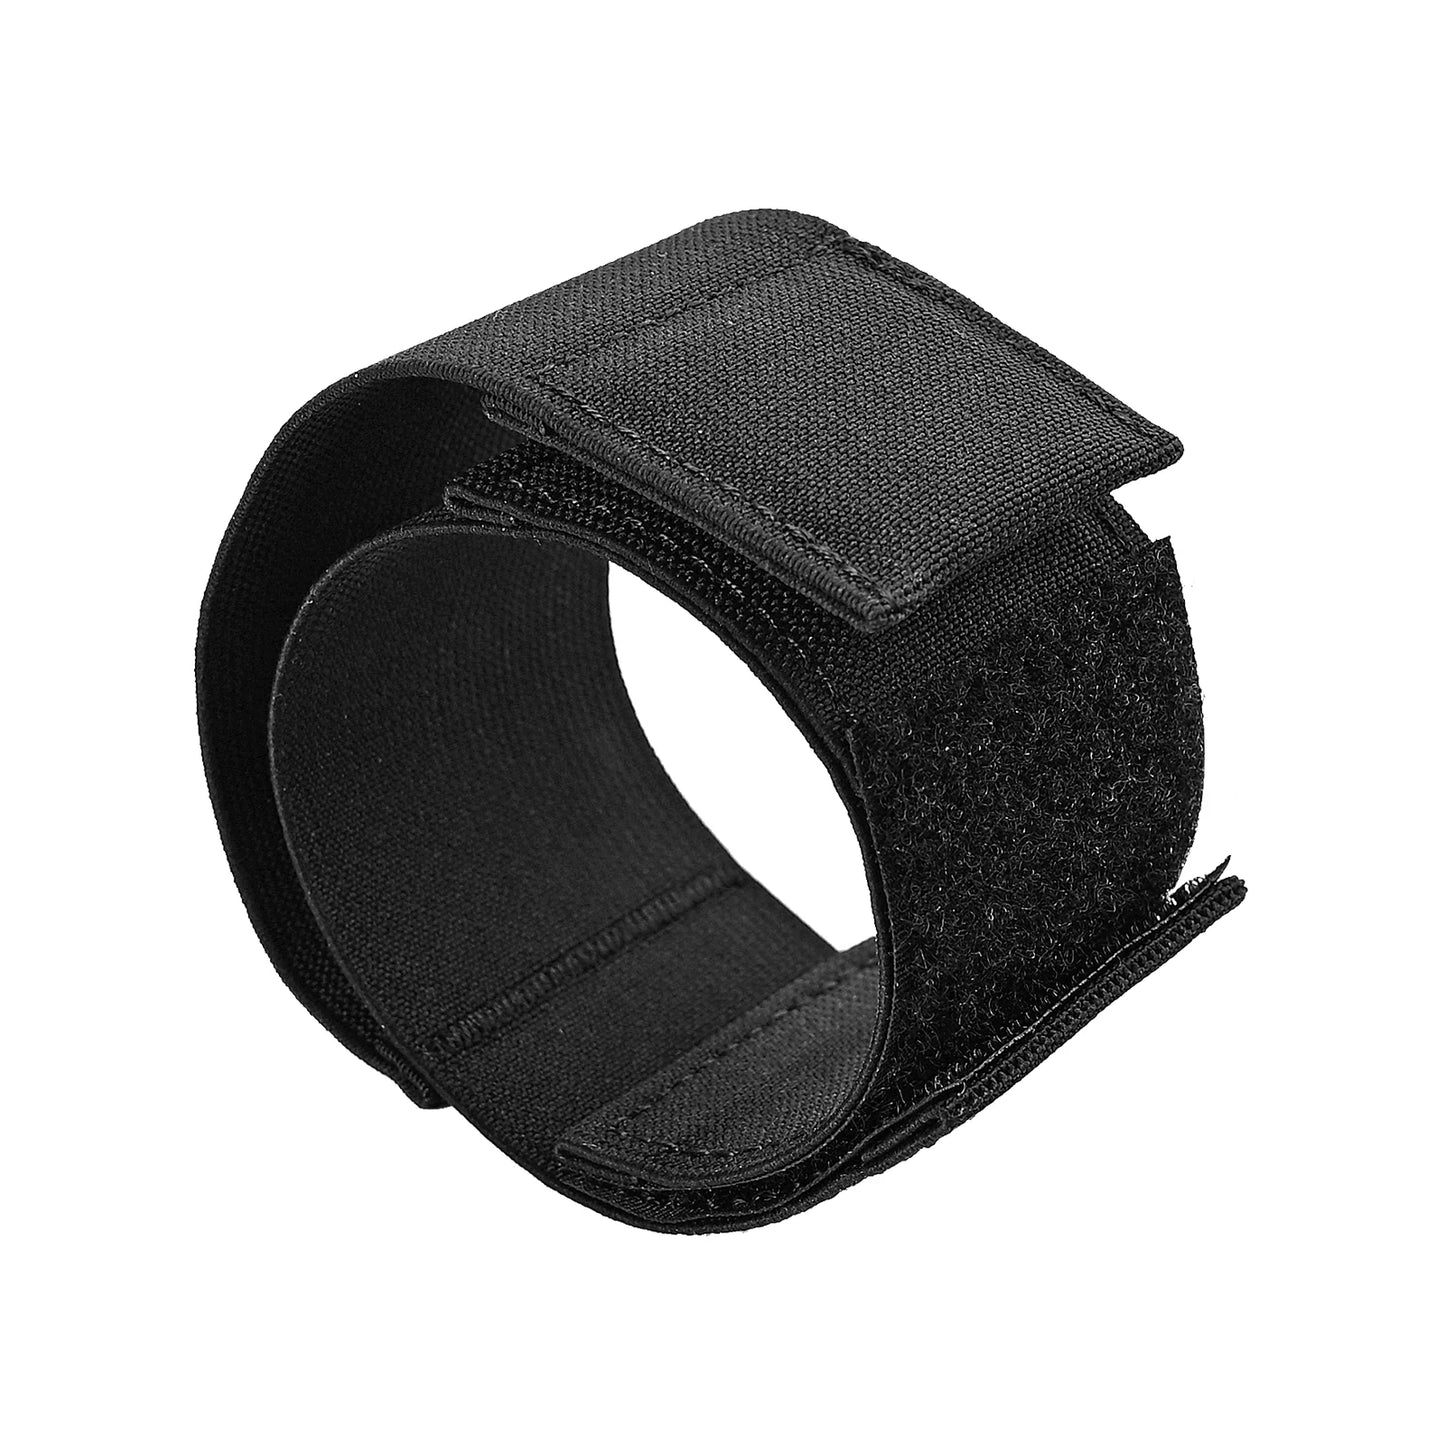 Tactical Magnetic Sentry Strap Rifle Sling Keeper